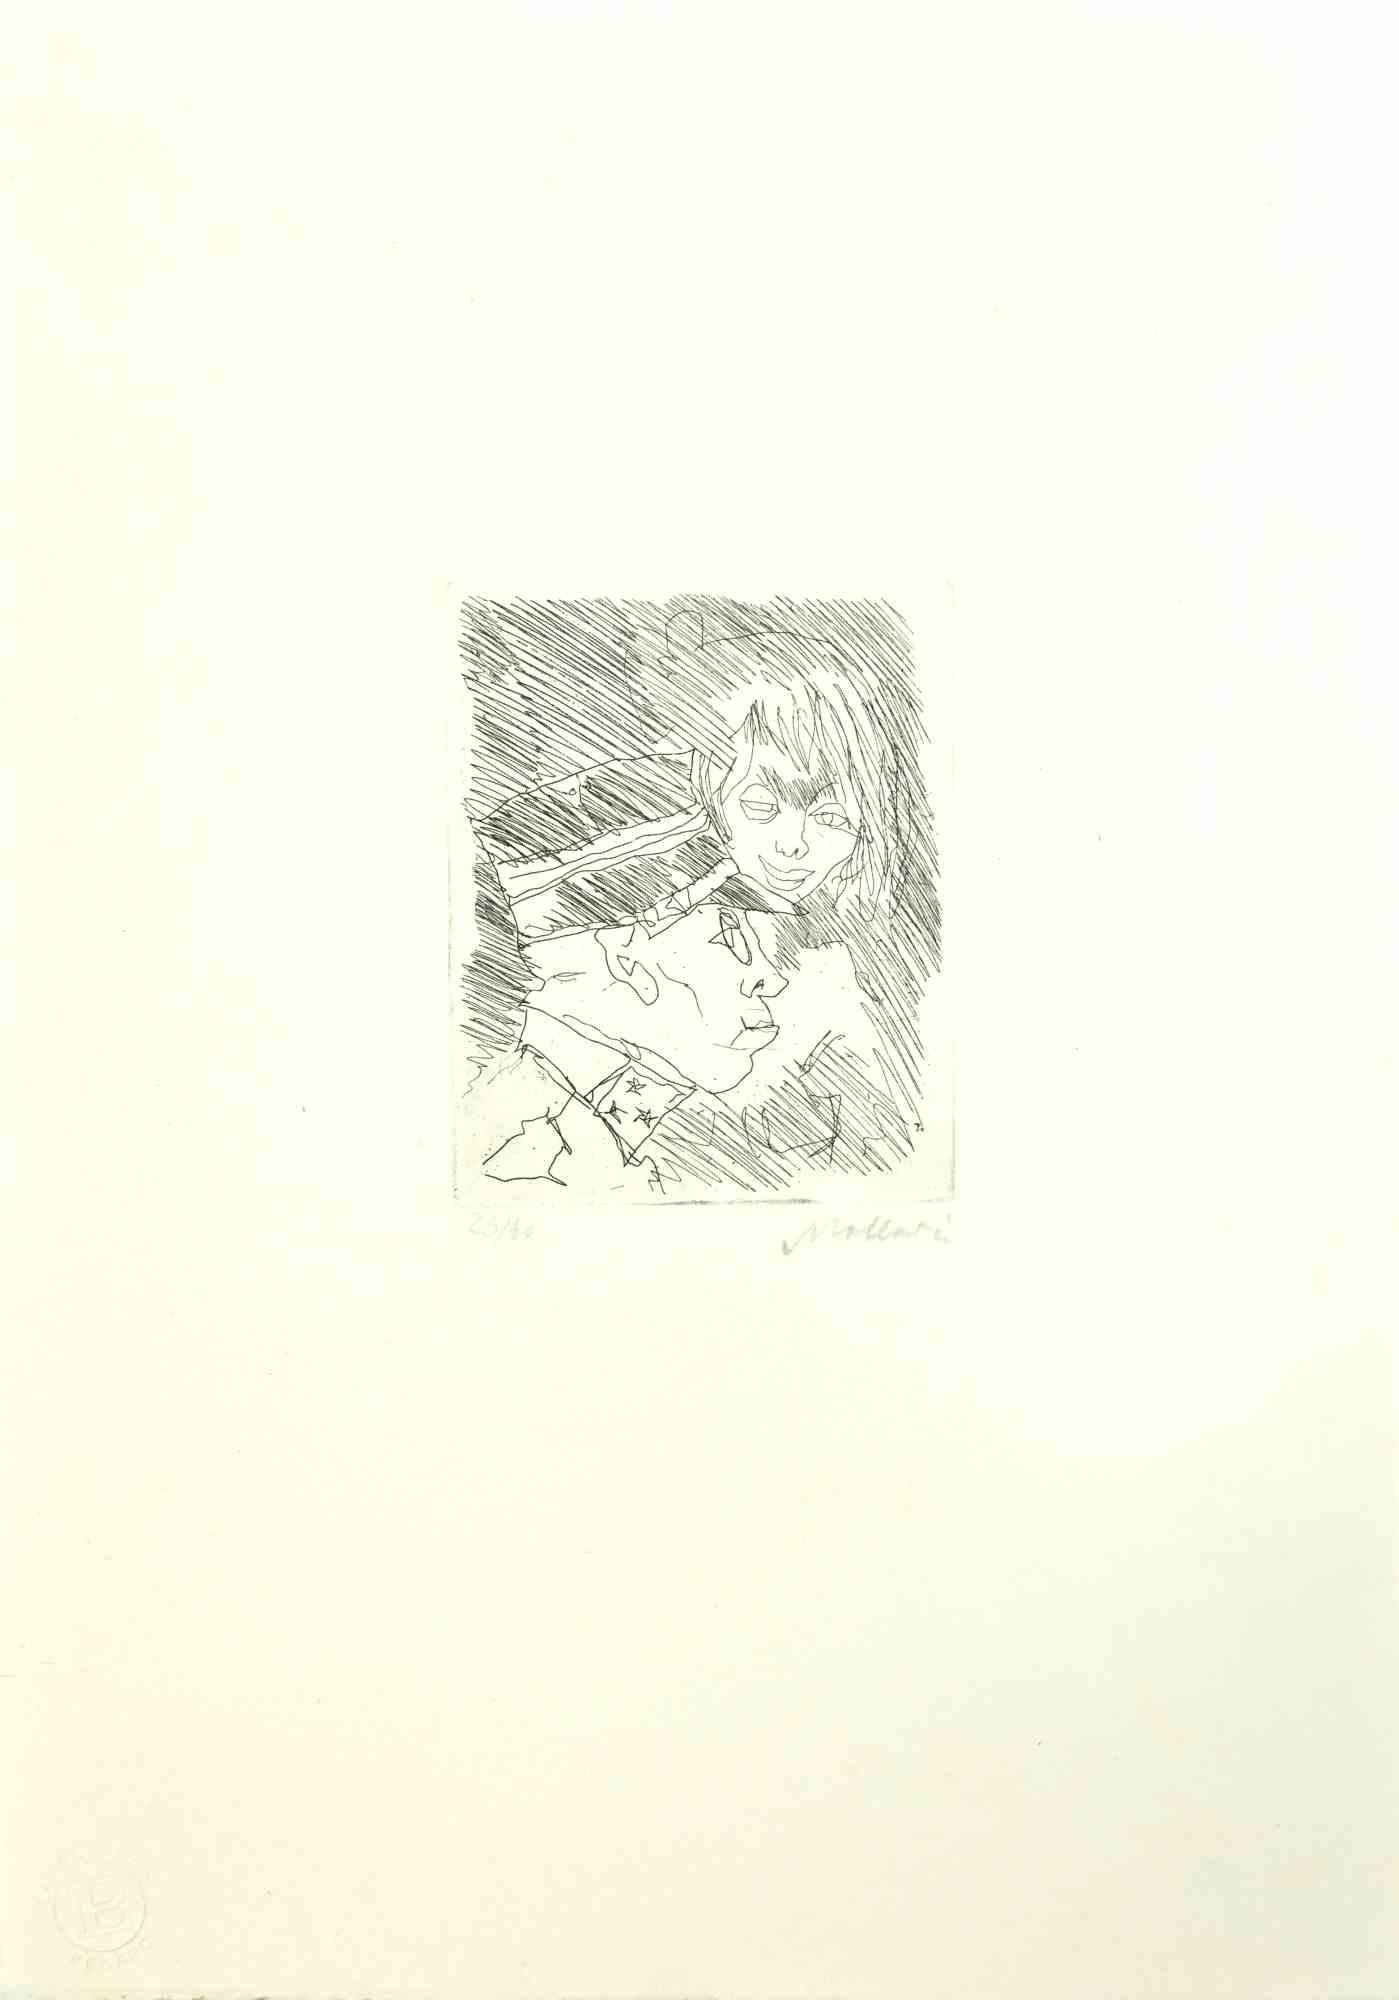 The Officer is an Etching and Drypoint realized by Mino Maccari in the Mid-20th Century.

Hand-signed in the lower right part.

Numbered. Edition,23/40.

Good conditions.

Mino Maccari (Siena, 1924-Rome, June 16, 1989) was an Italian writer,